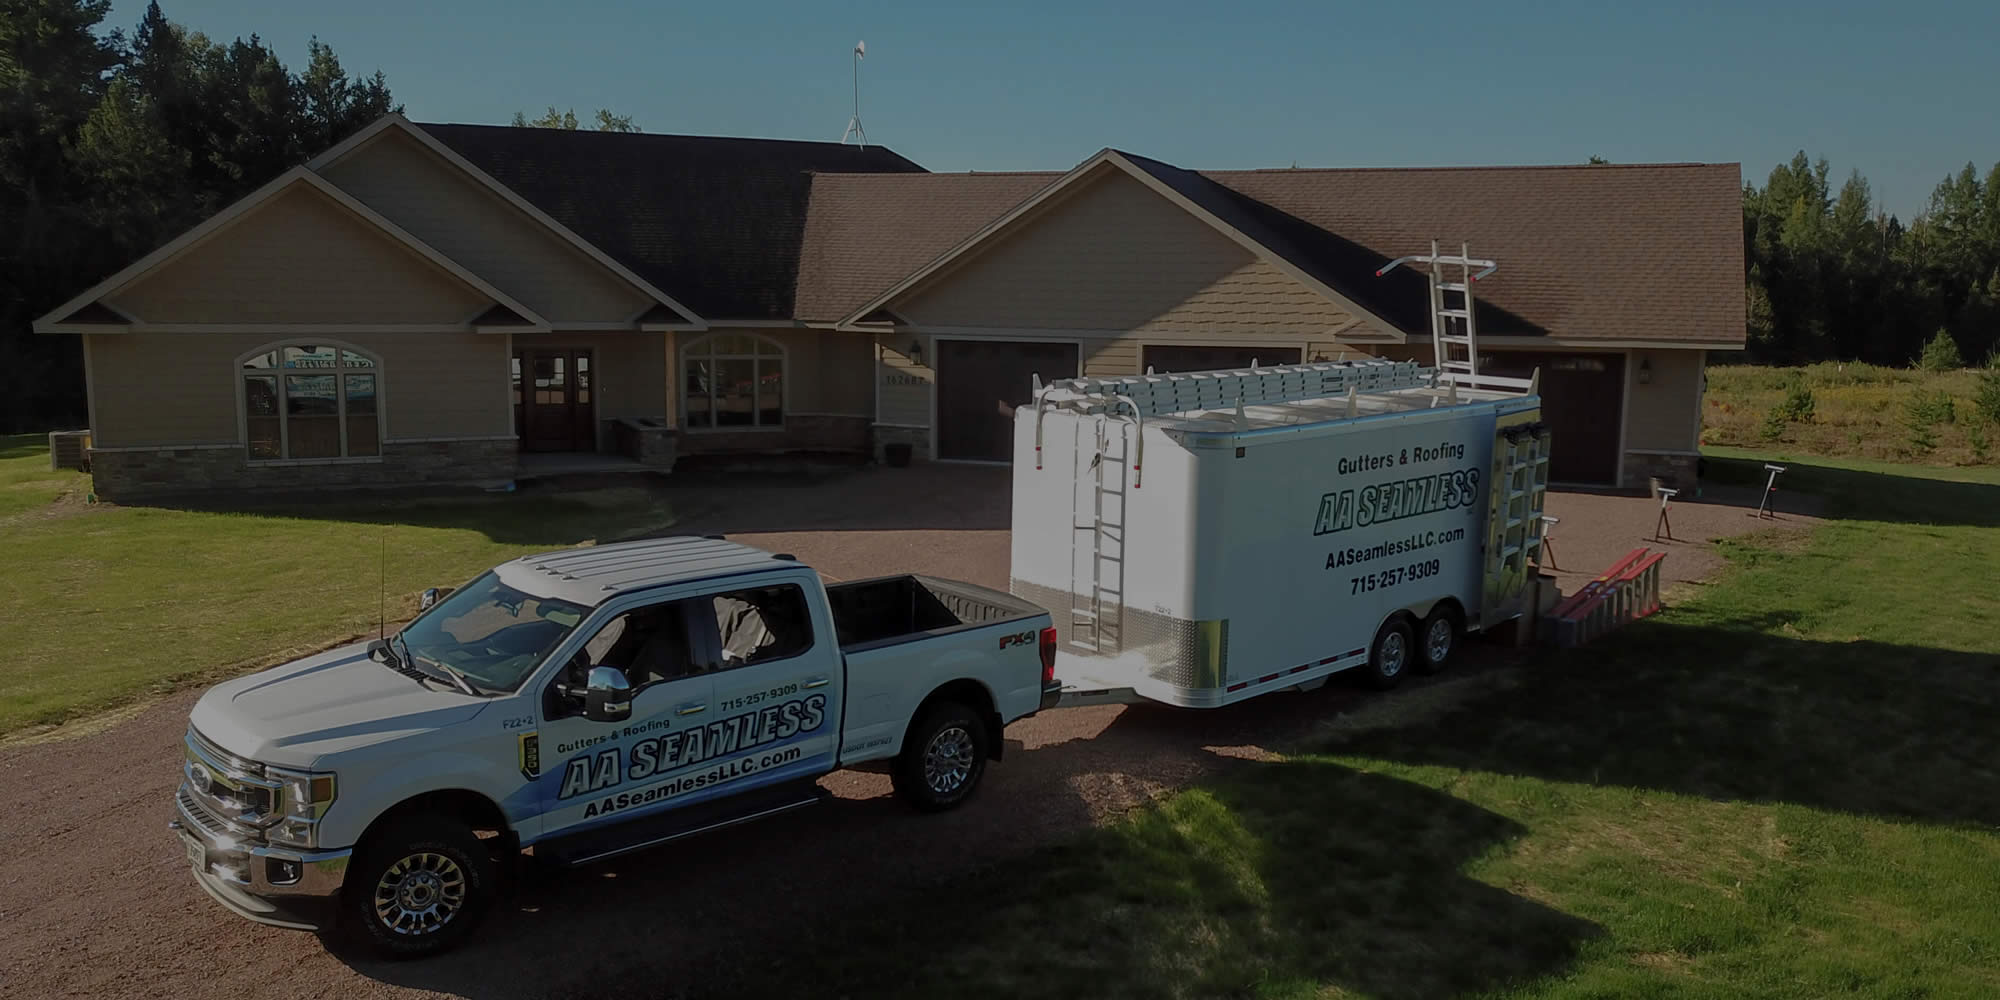 Gutter and Roofing Services Antigo